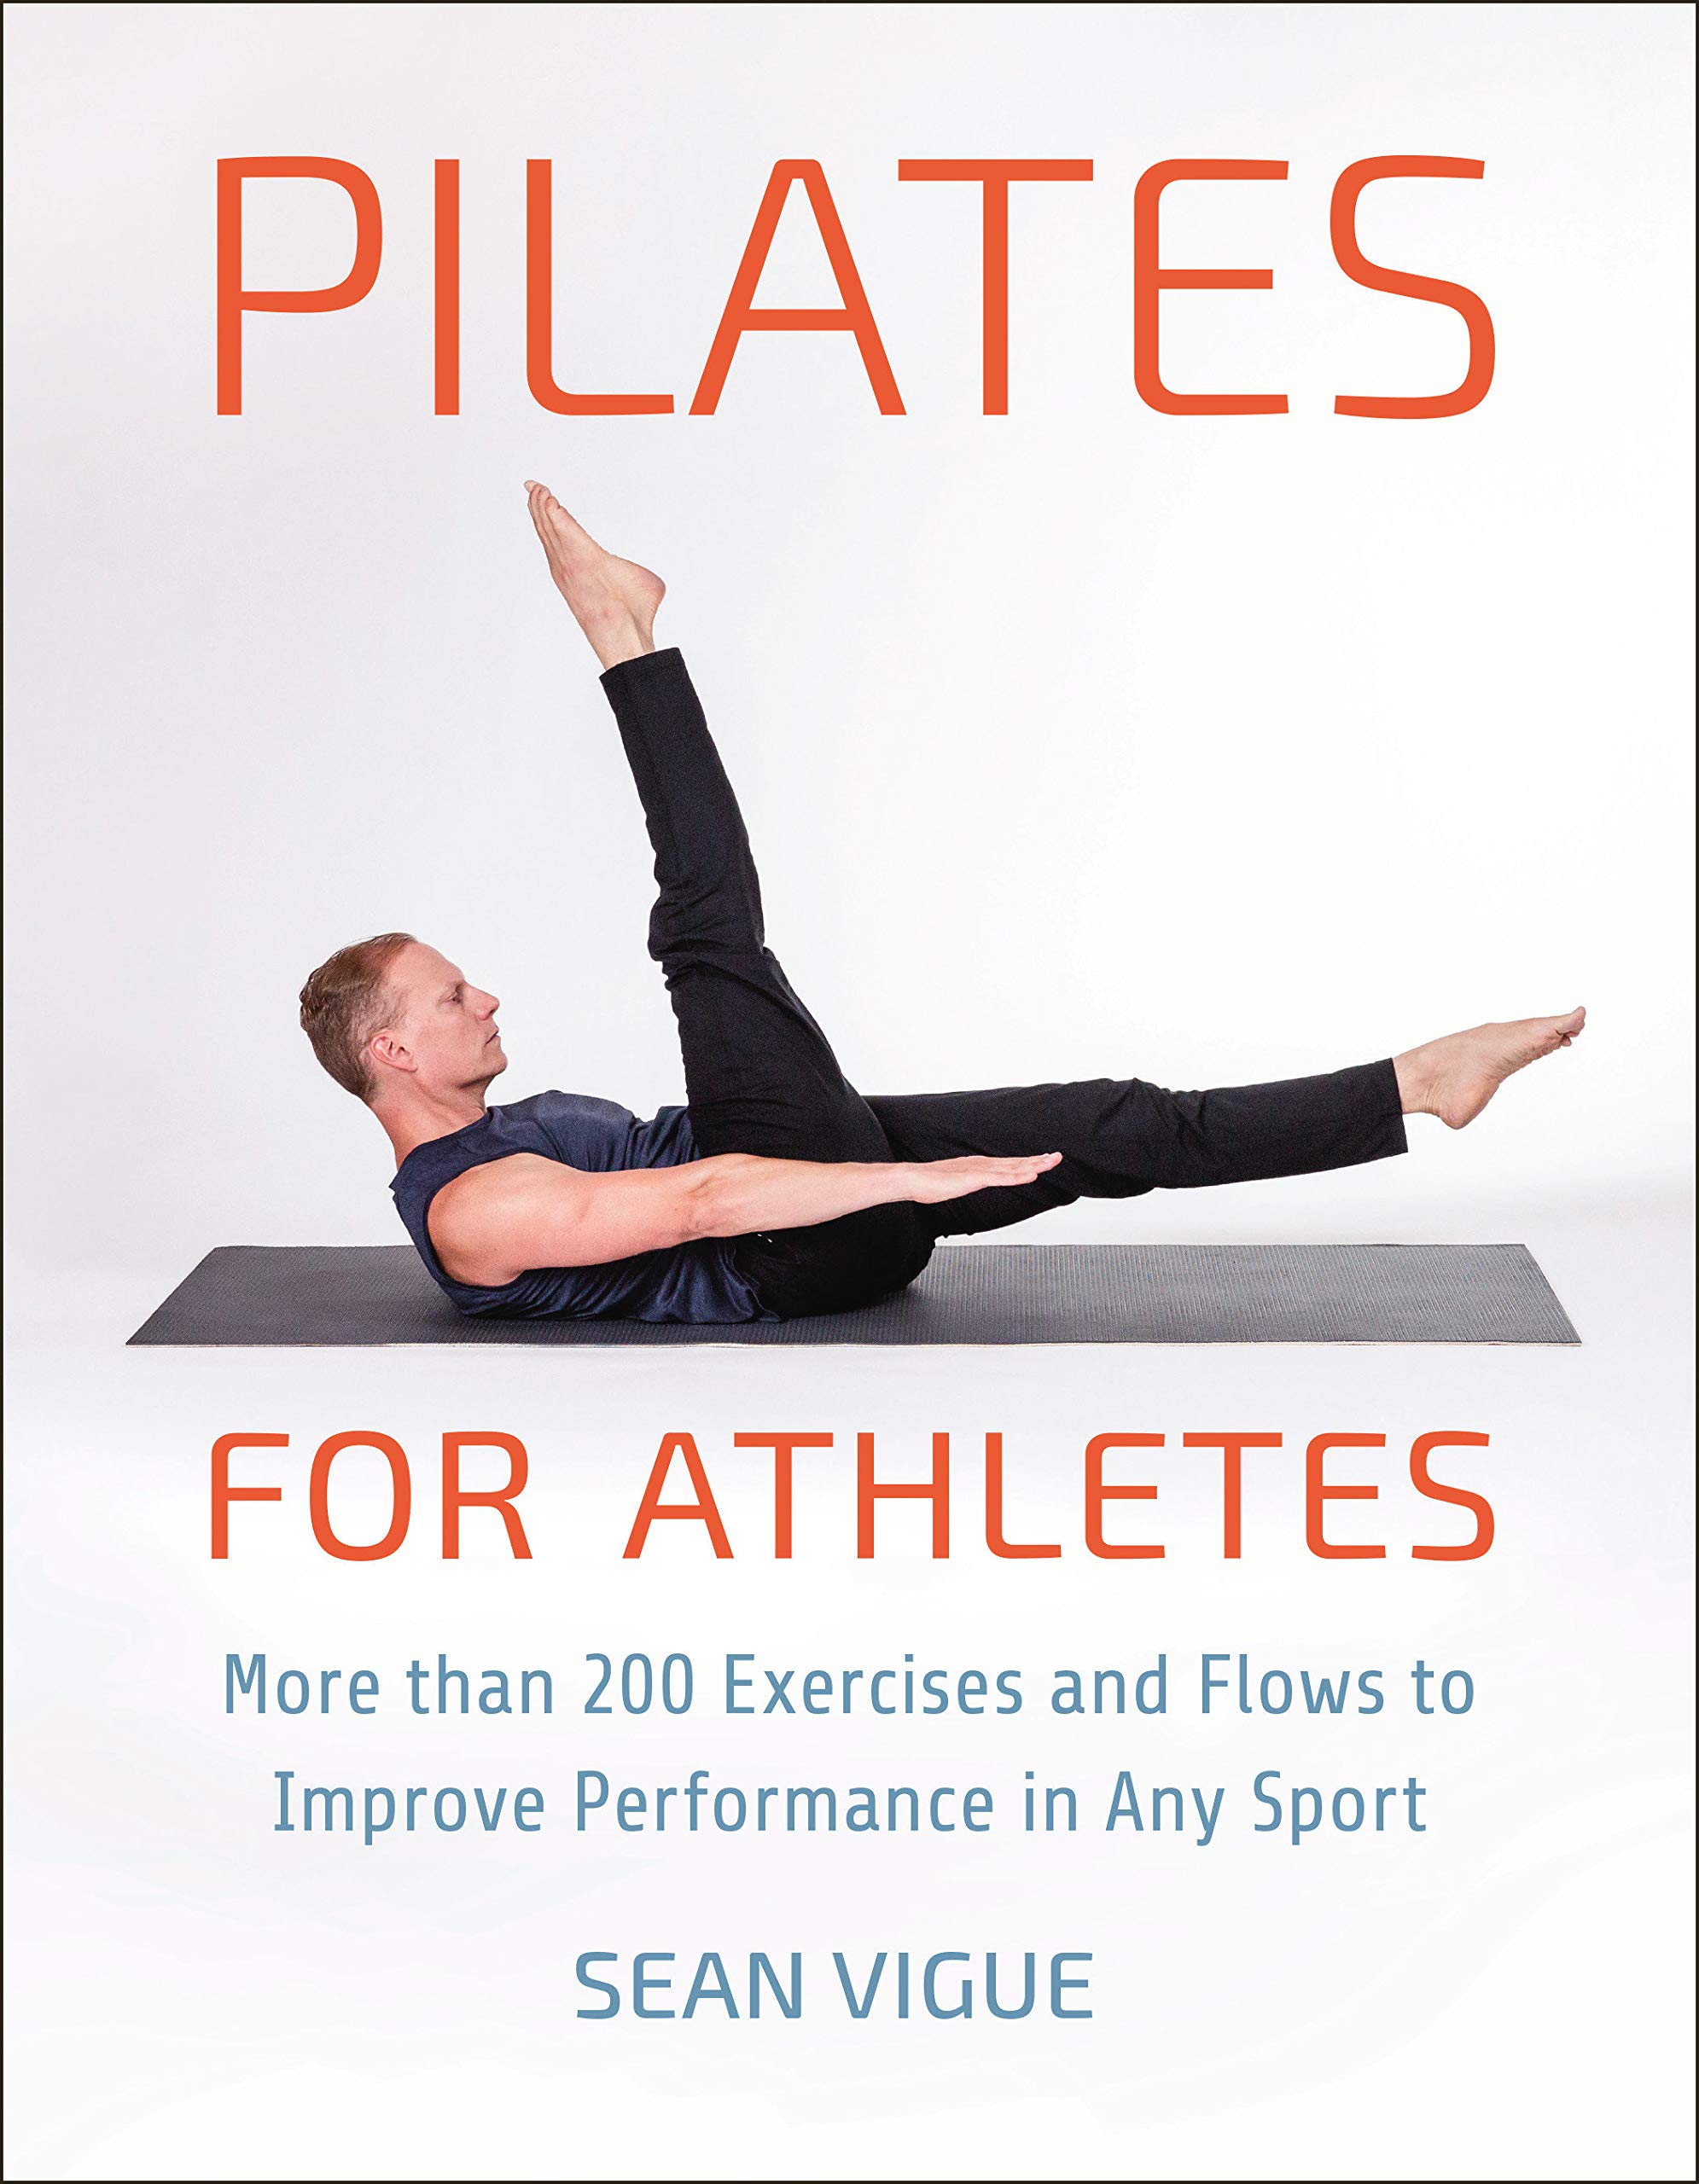 Pilates for Athletes: More than 200 Exercises to Improve Performance in Any Sport